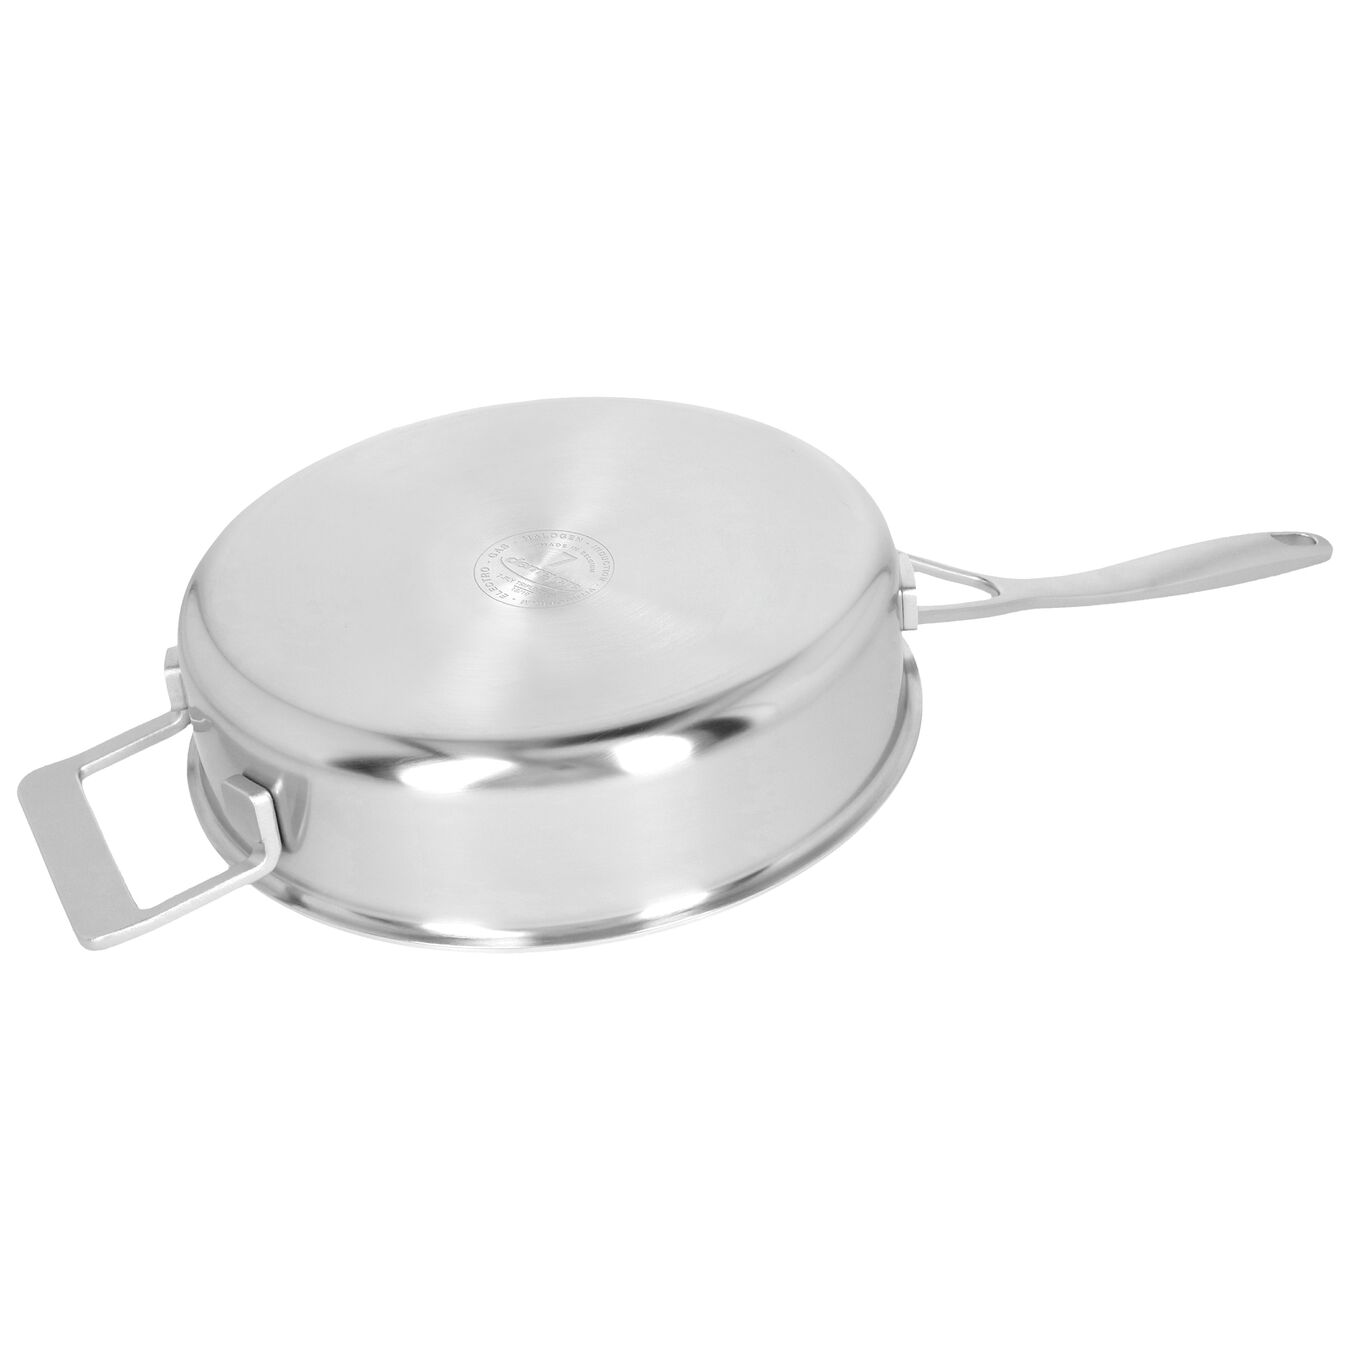 24 cm 18/10 Stainless Steel Saute pan with lid,,large 4